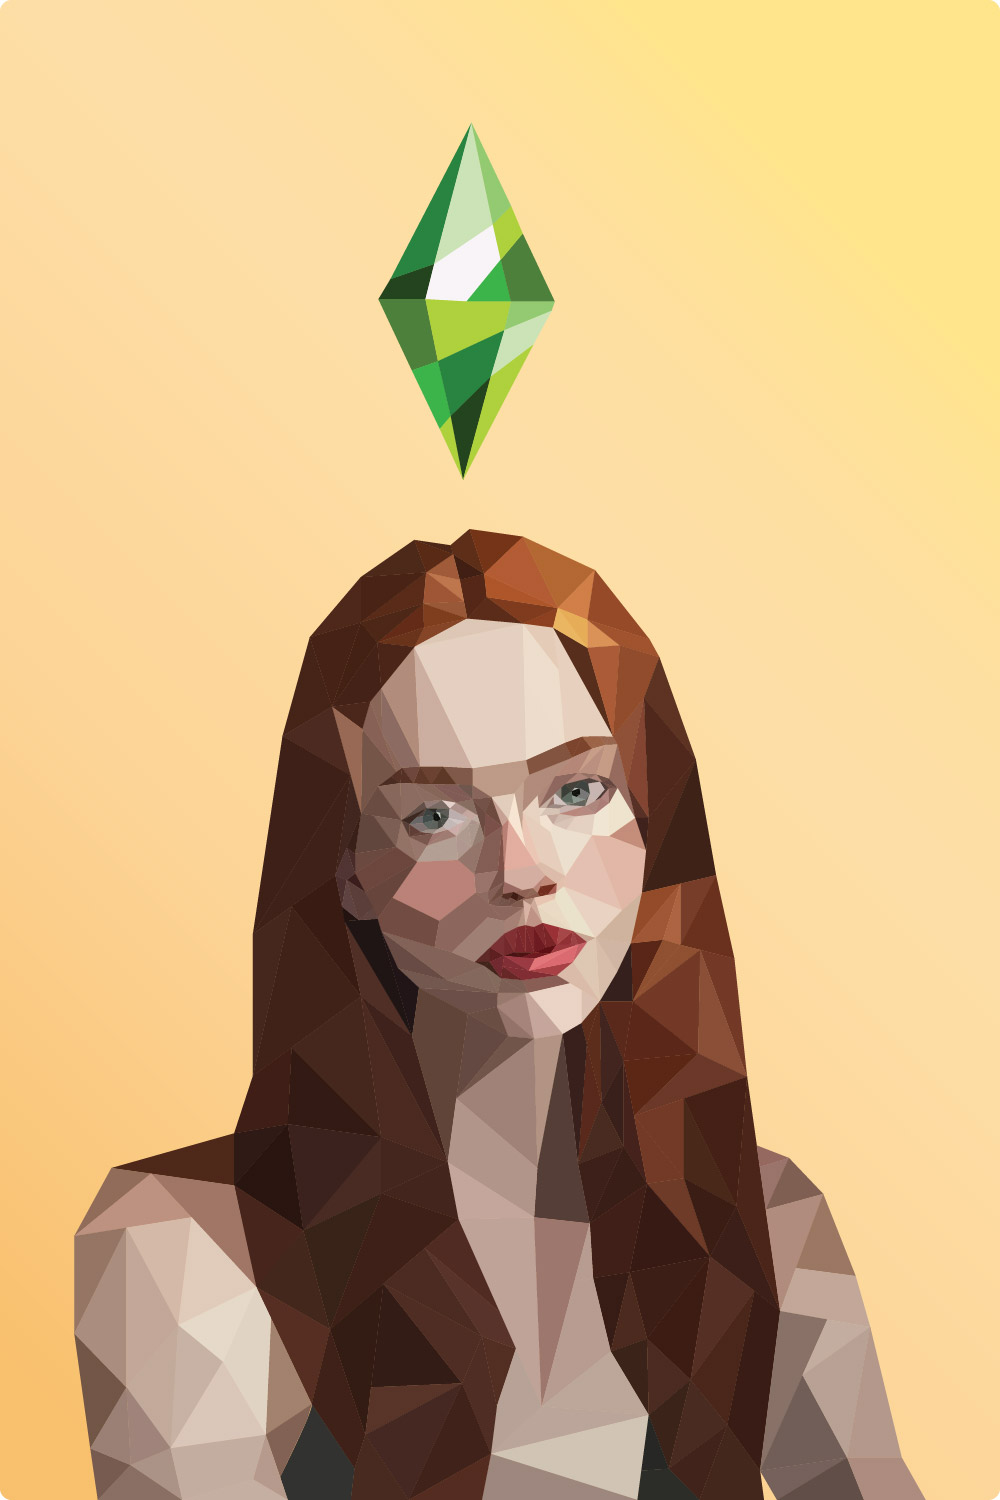 Sims character in Low Poly style pinterest preview image.